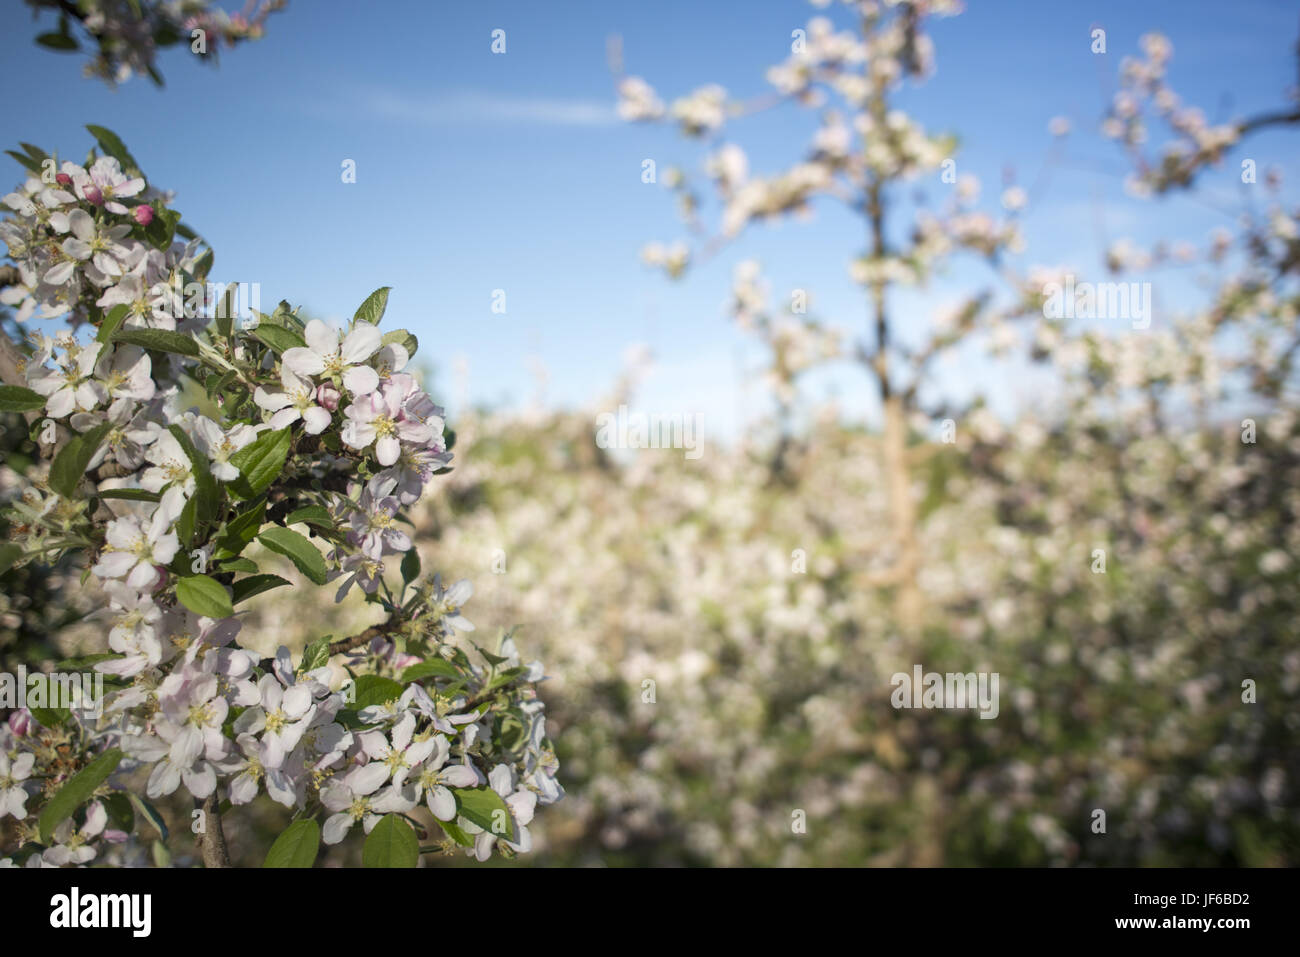 Blossoms on a pear tree in Spring Stock Photo